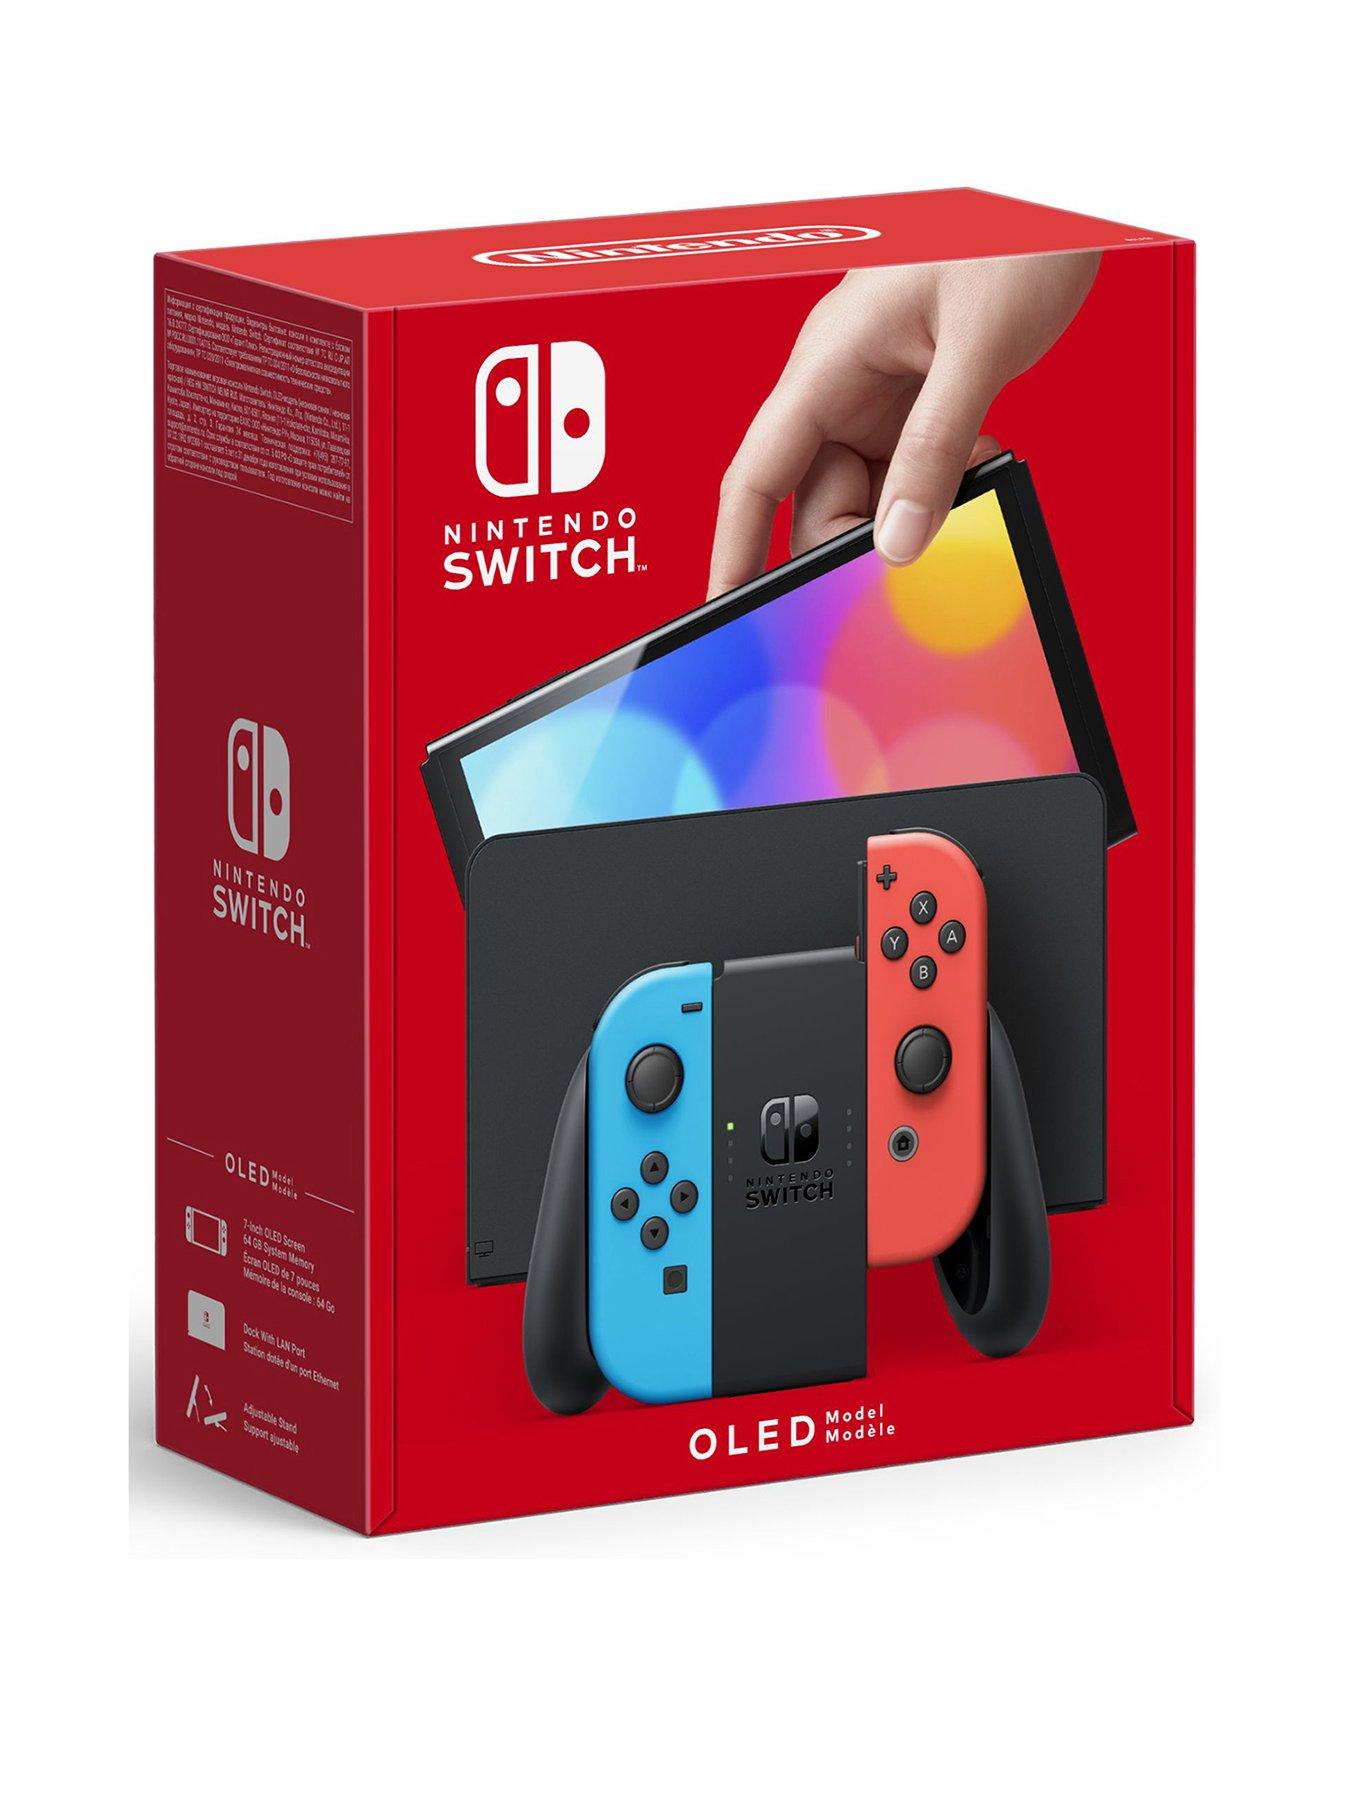 Nintendo Switch Oled Console - Neon Blue/Neon Red